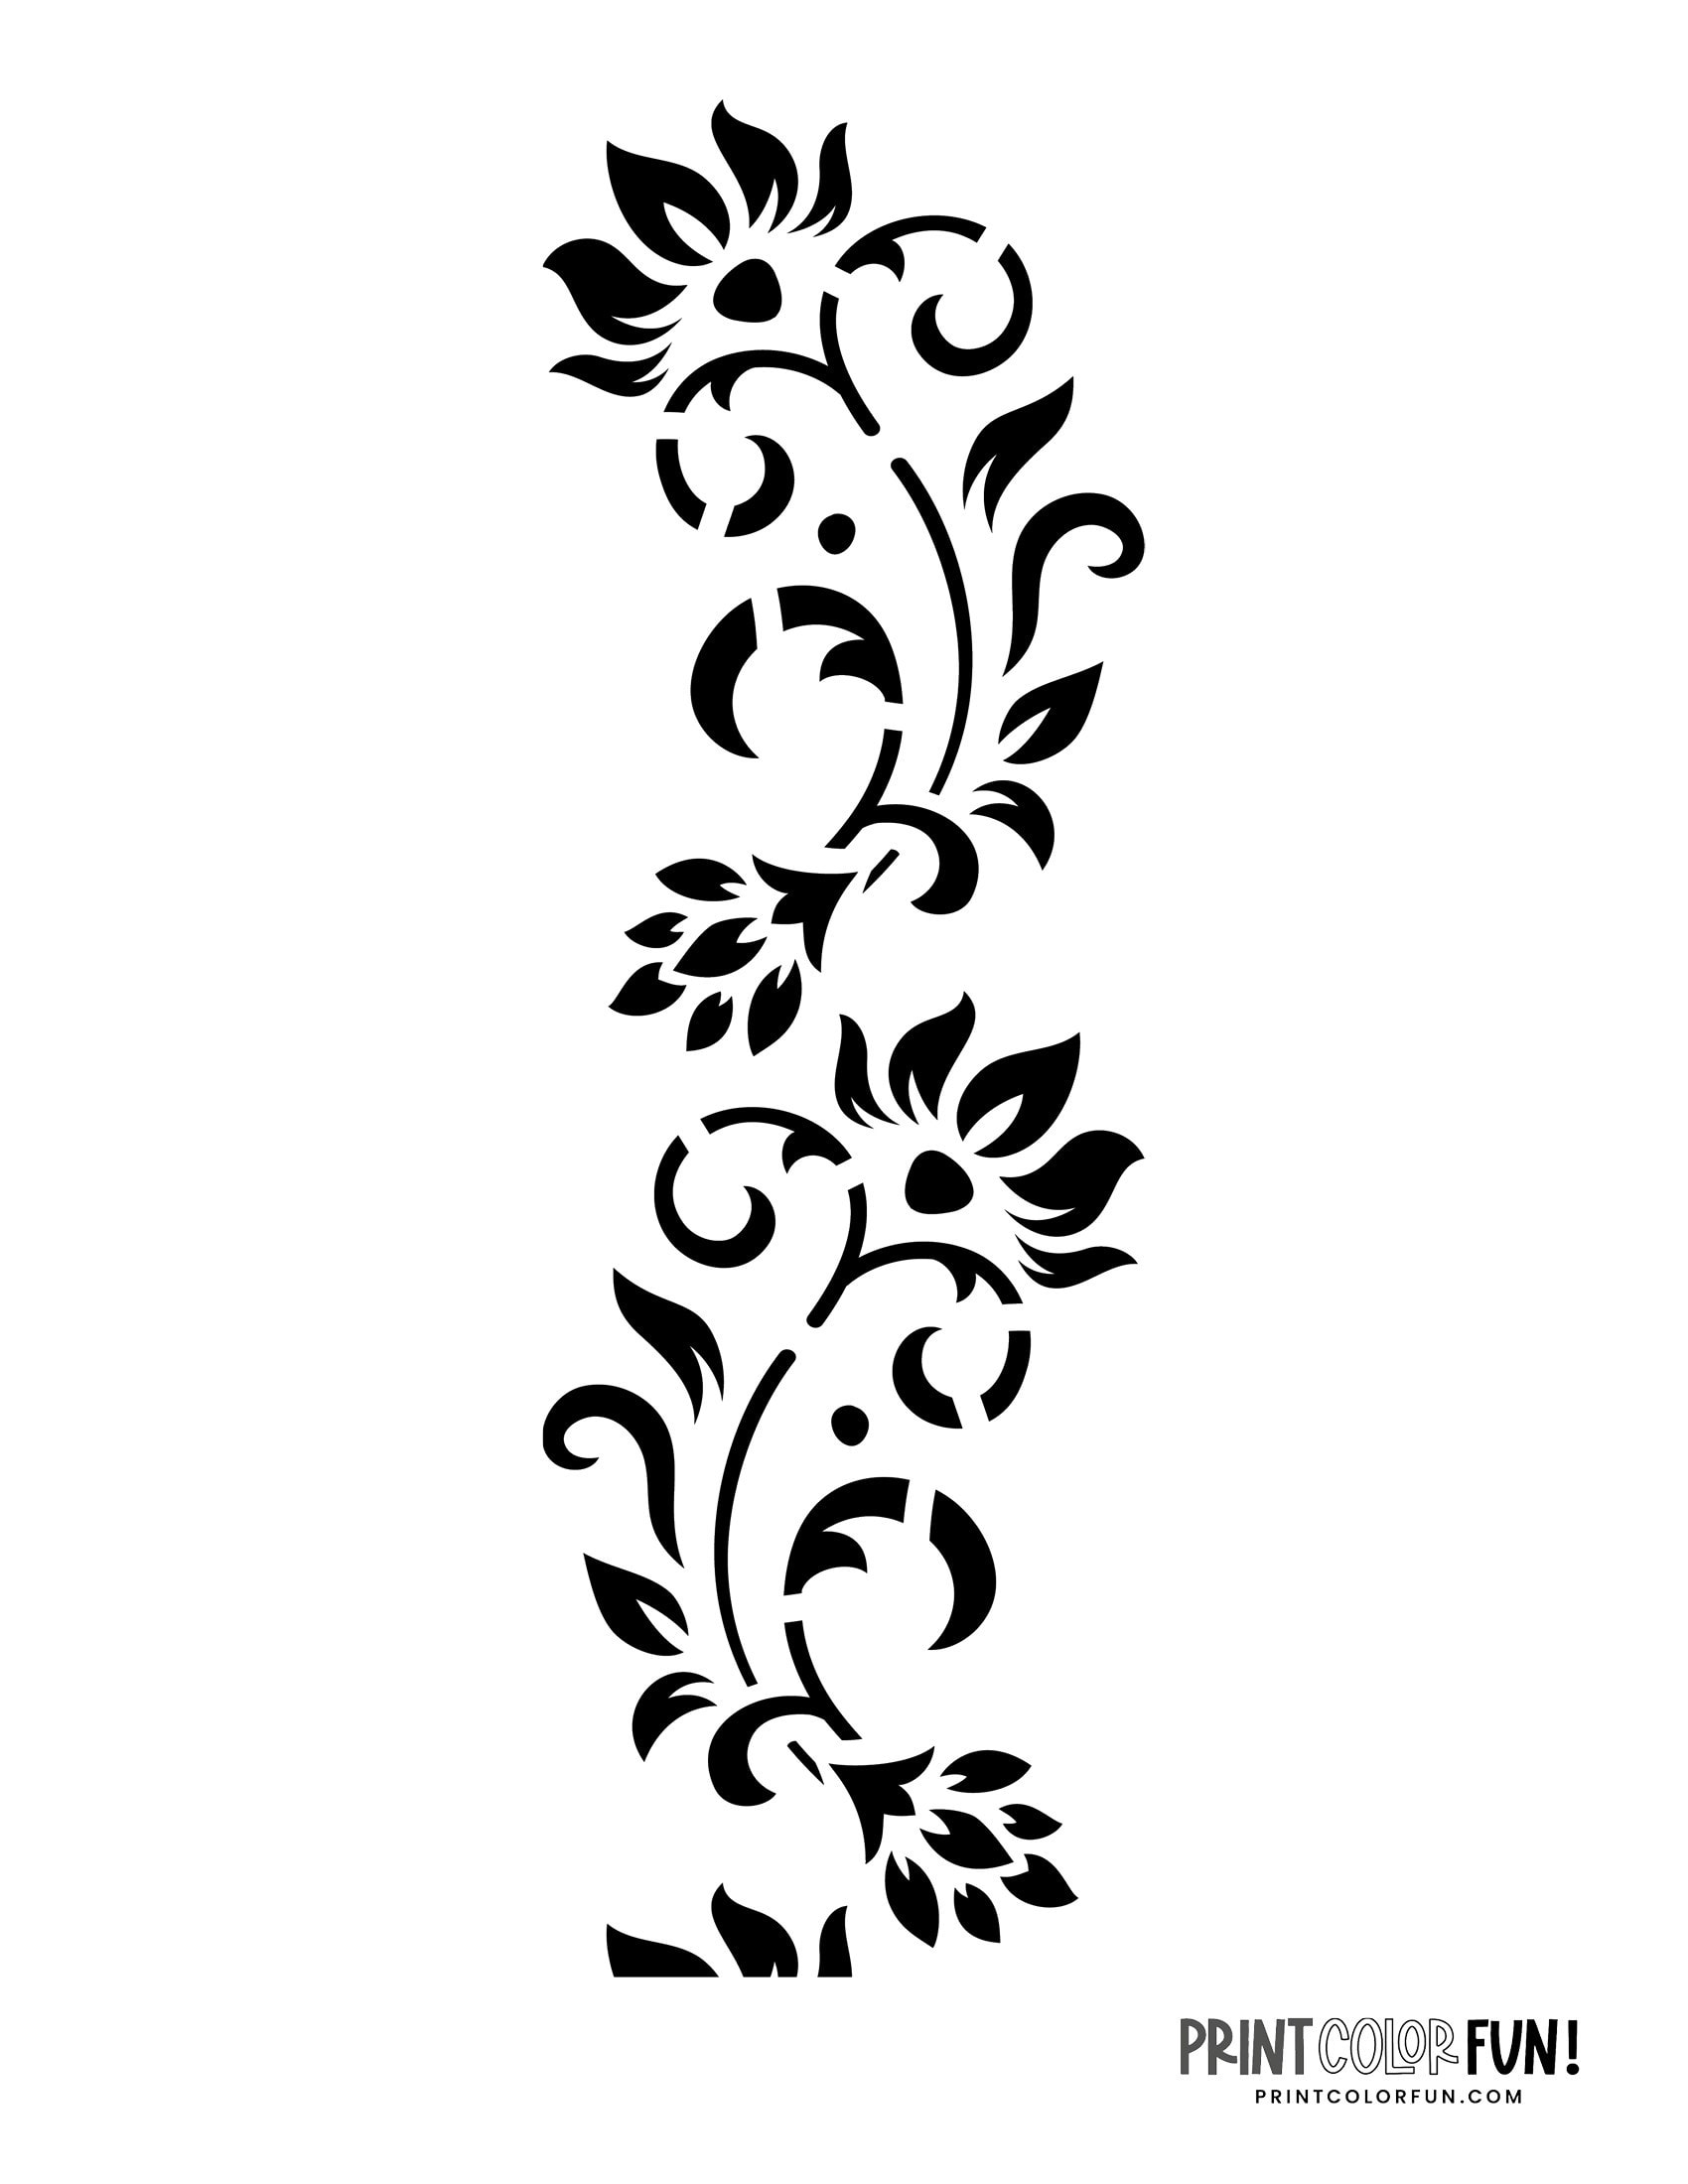 10 free flower stencil designs for printing & craft projects, at ...